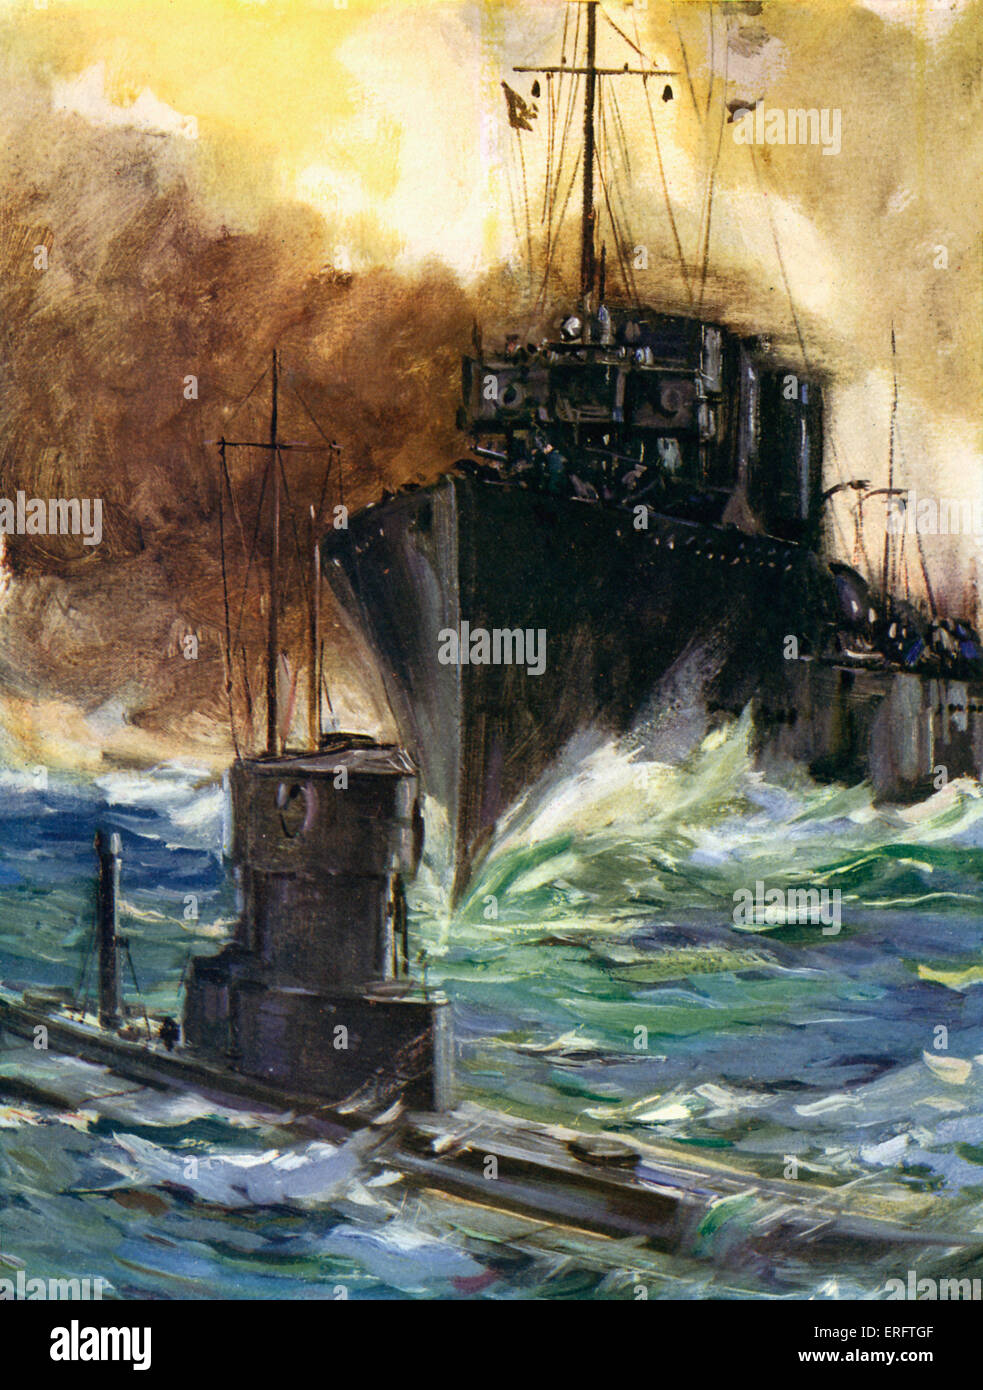 WWI German U Boat Submarine Rescuing Passengers Painting Real Canvas Art Print 